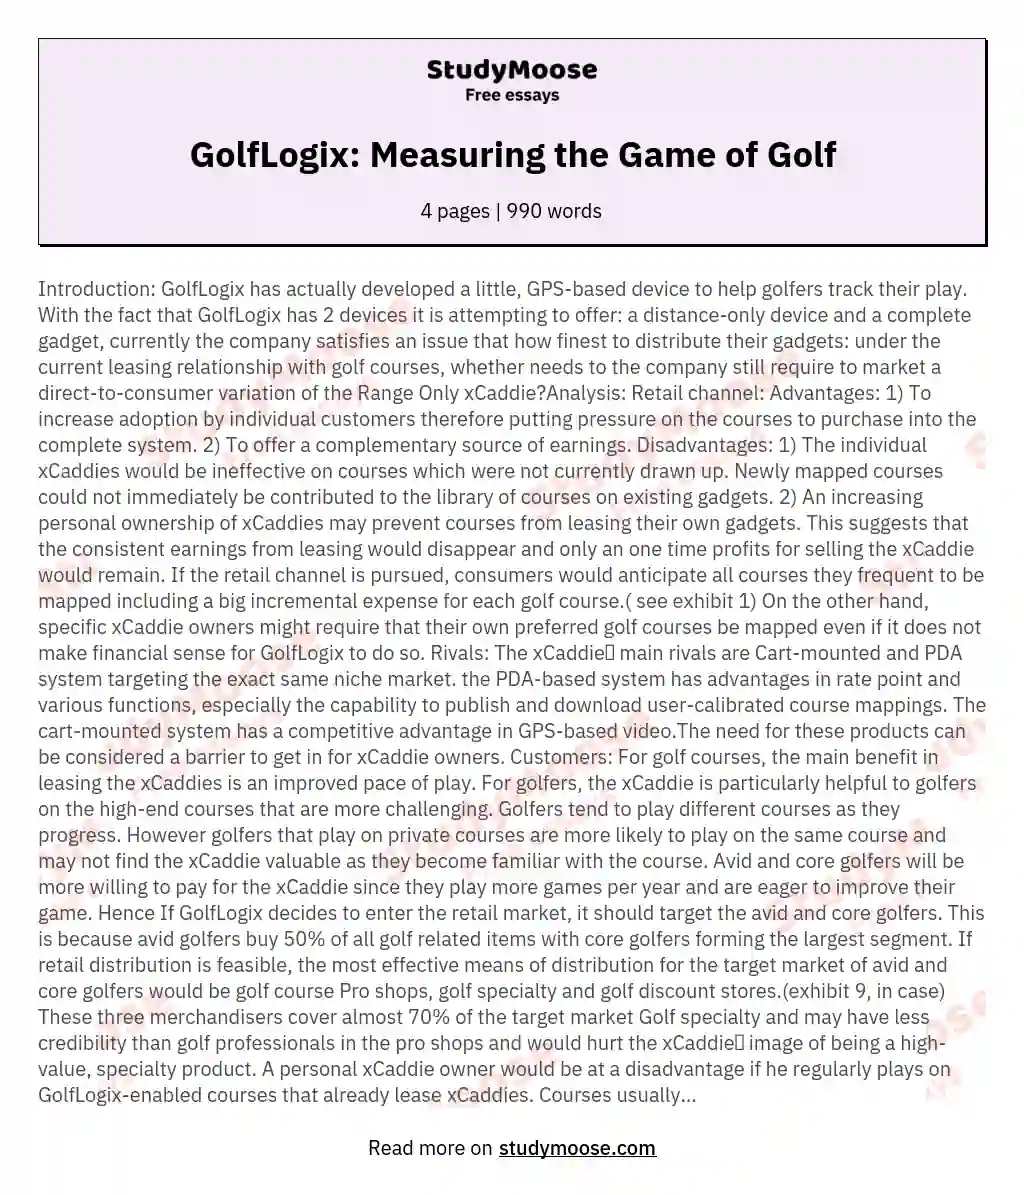 GolfLogix: Measuring the Game of Golf essay